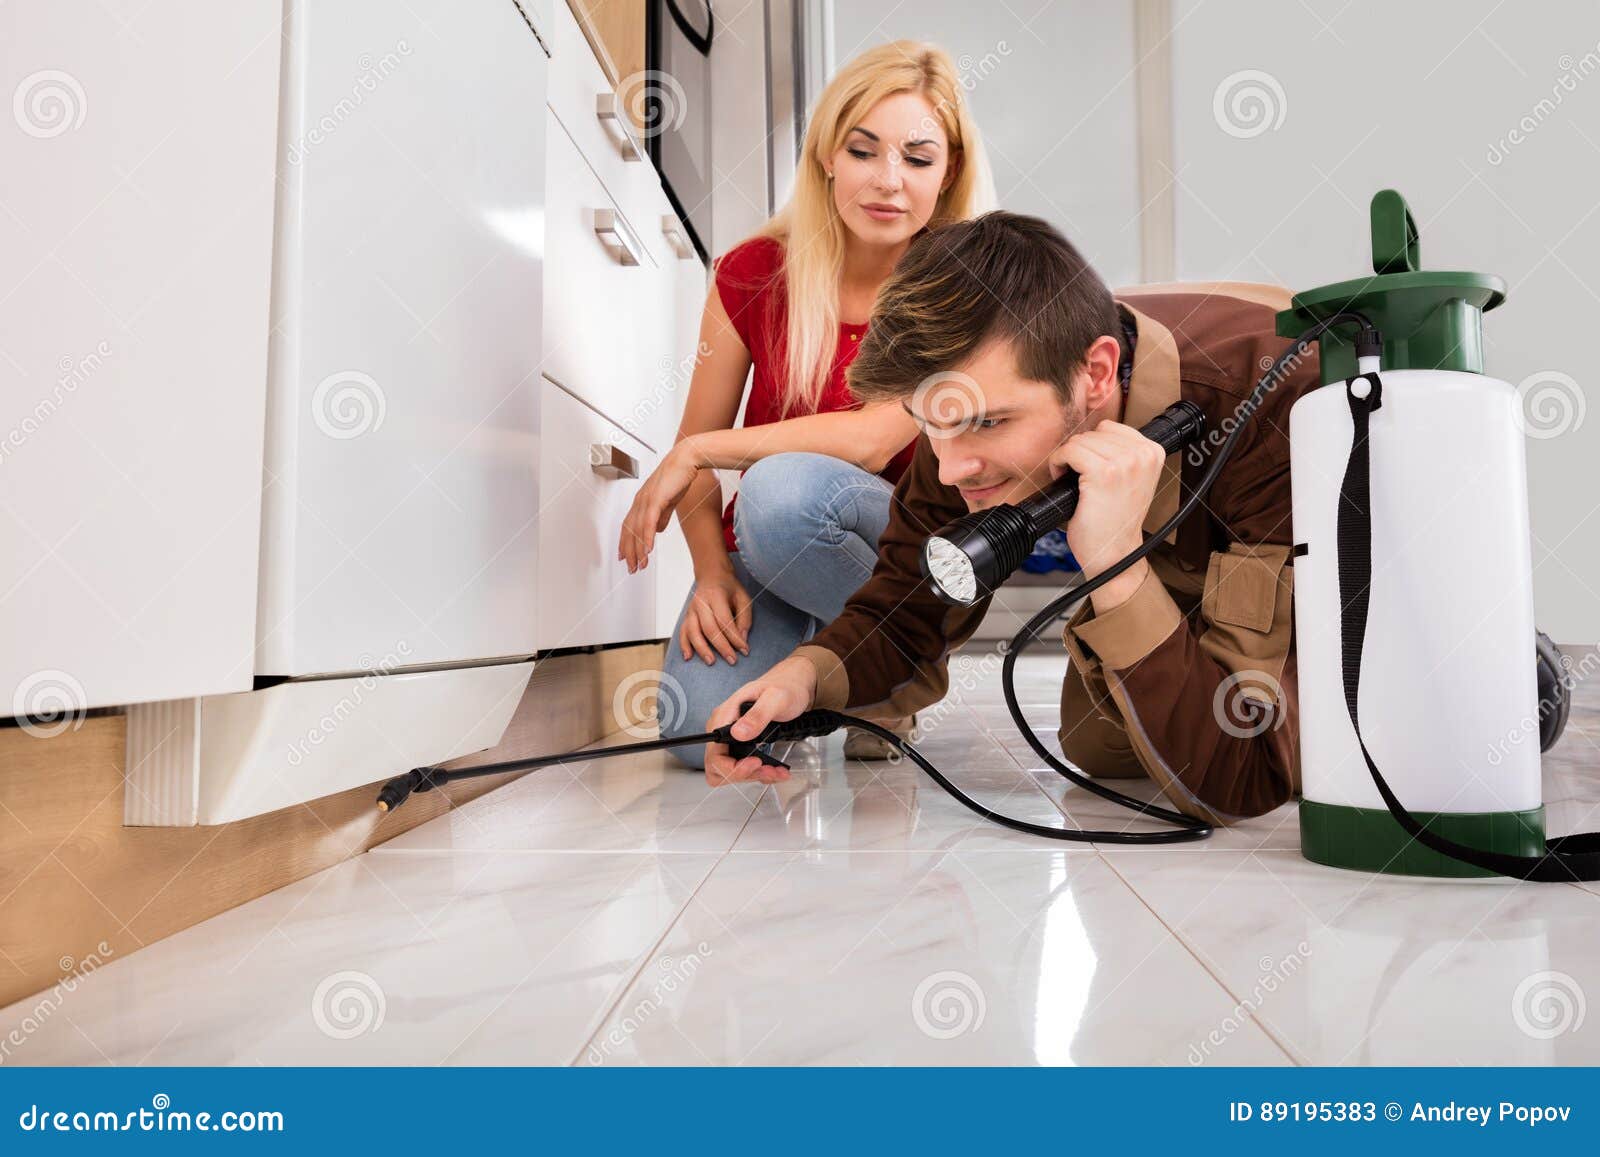 woman looking at male worker spraying insecticide